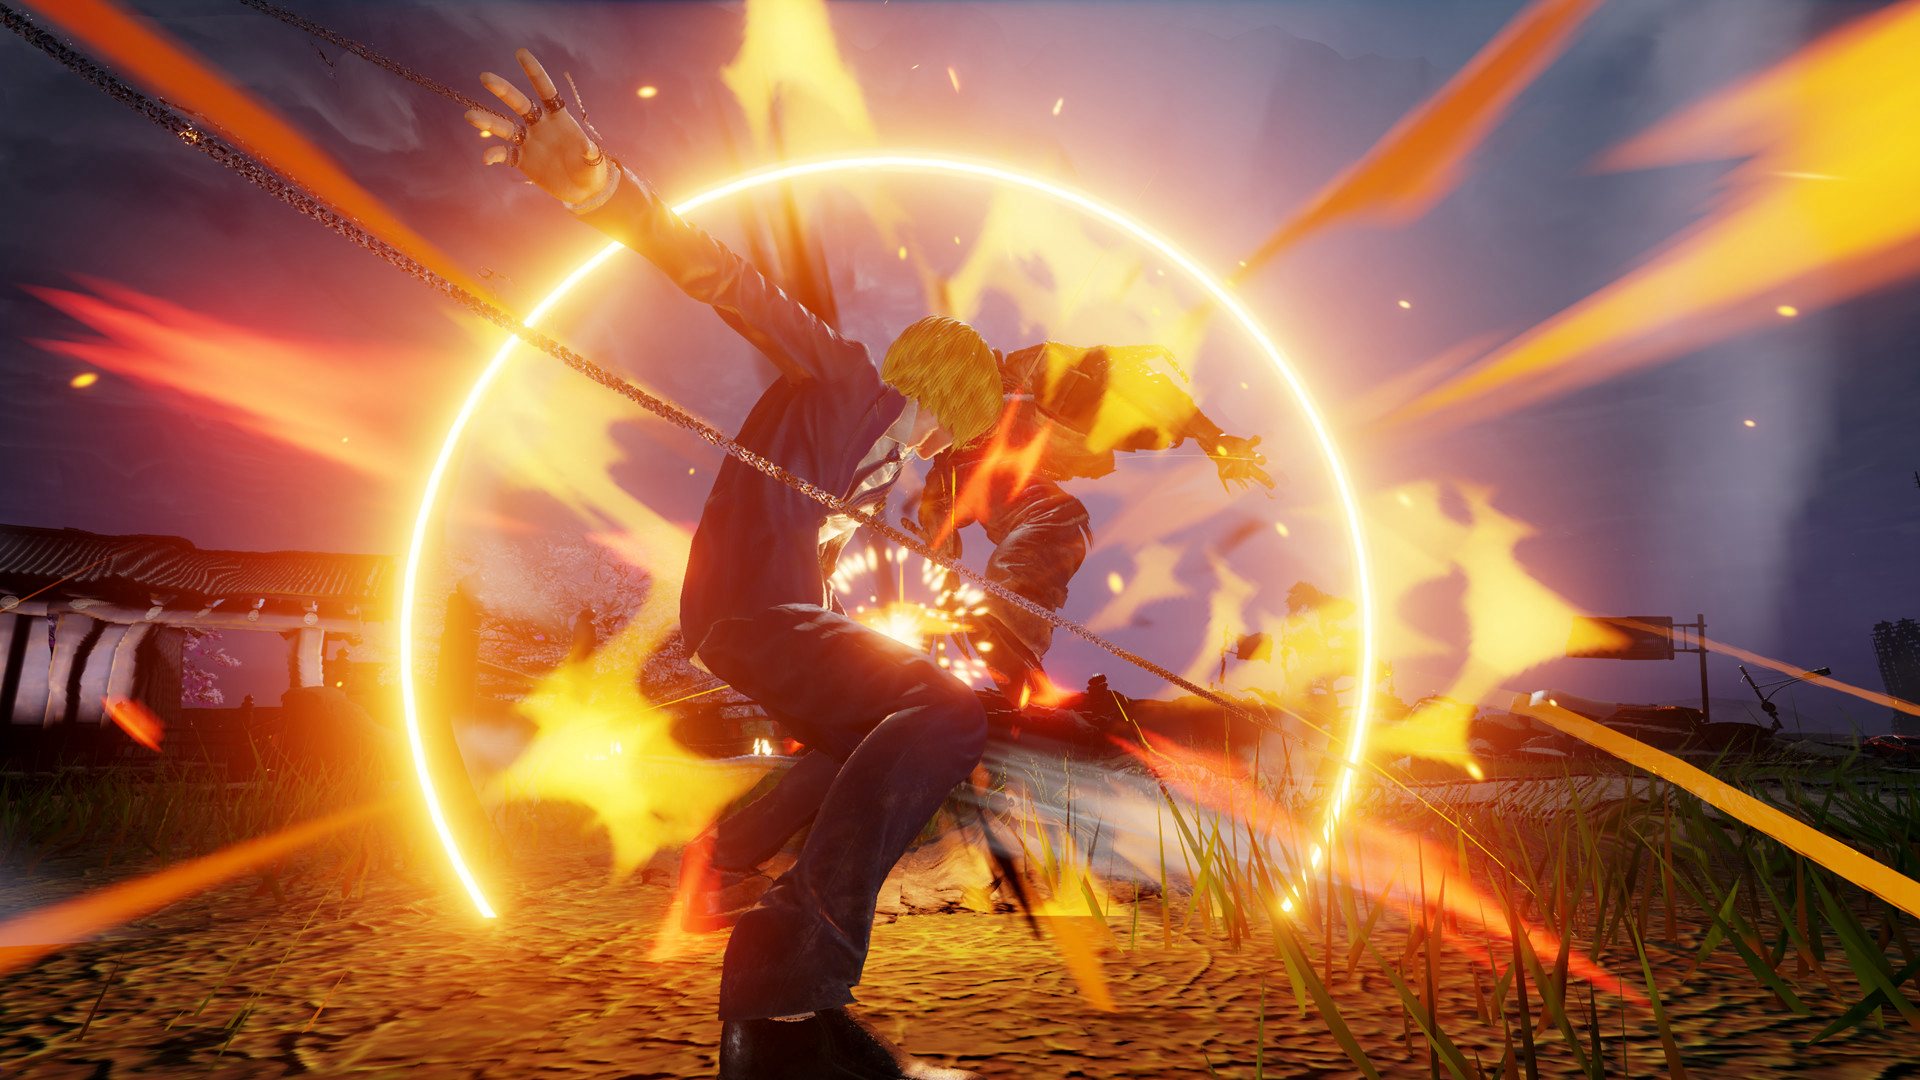 JUMP FORCE PlayStation 4 Account pixelpuffin.net Activation Link, 22.59 usd